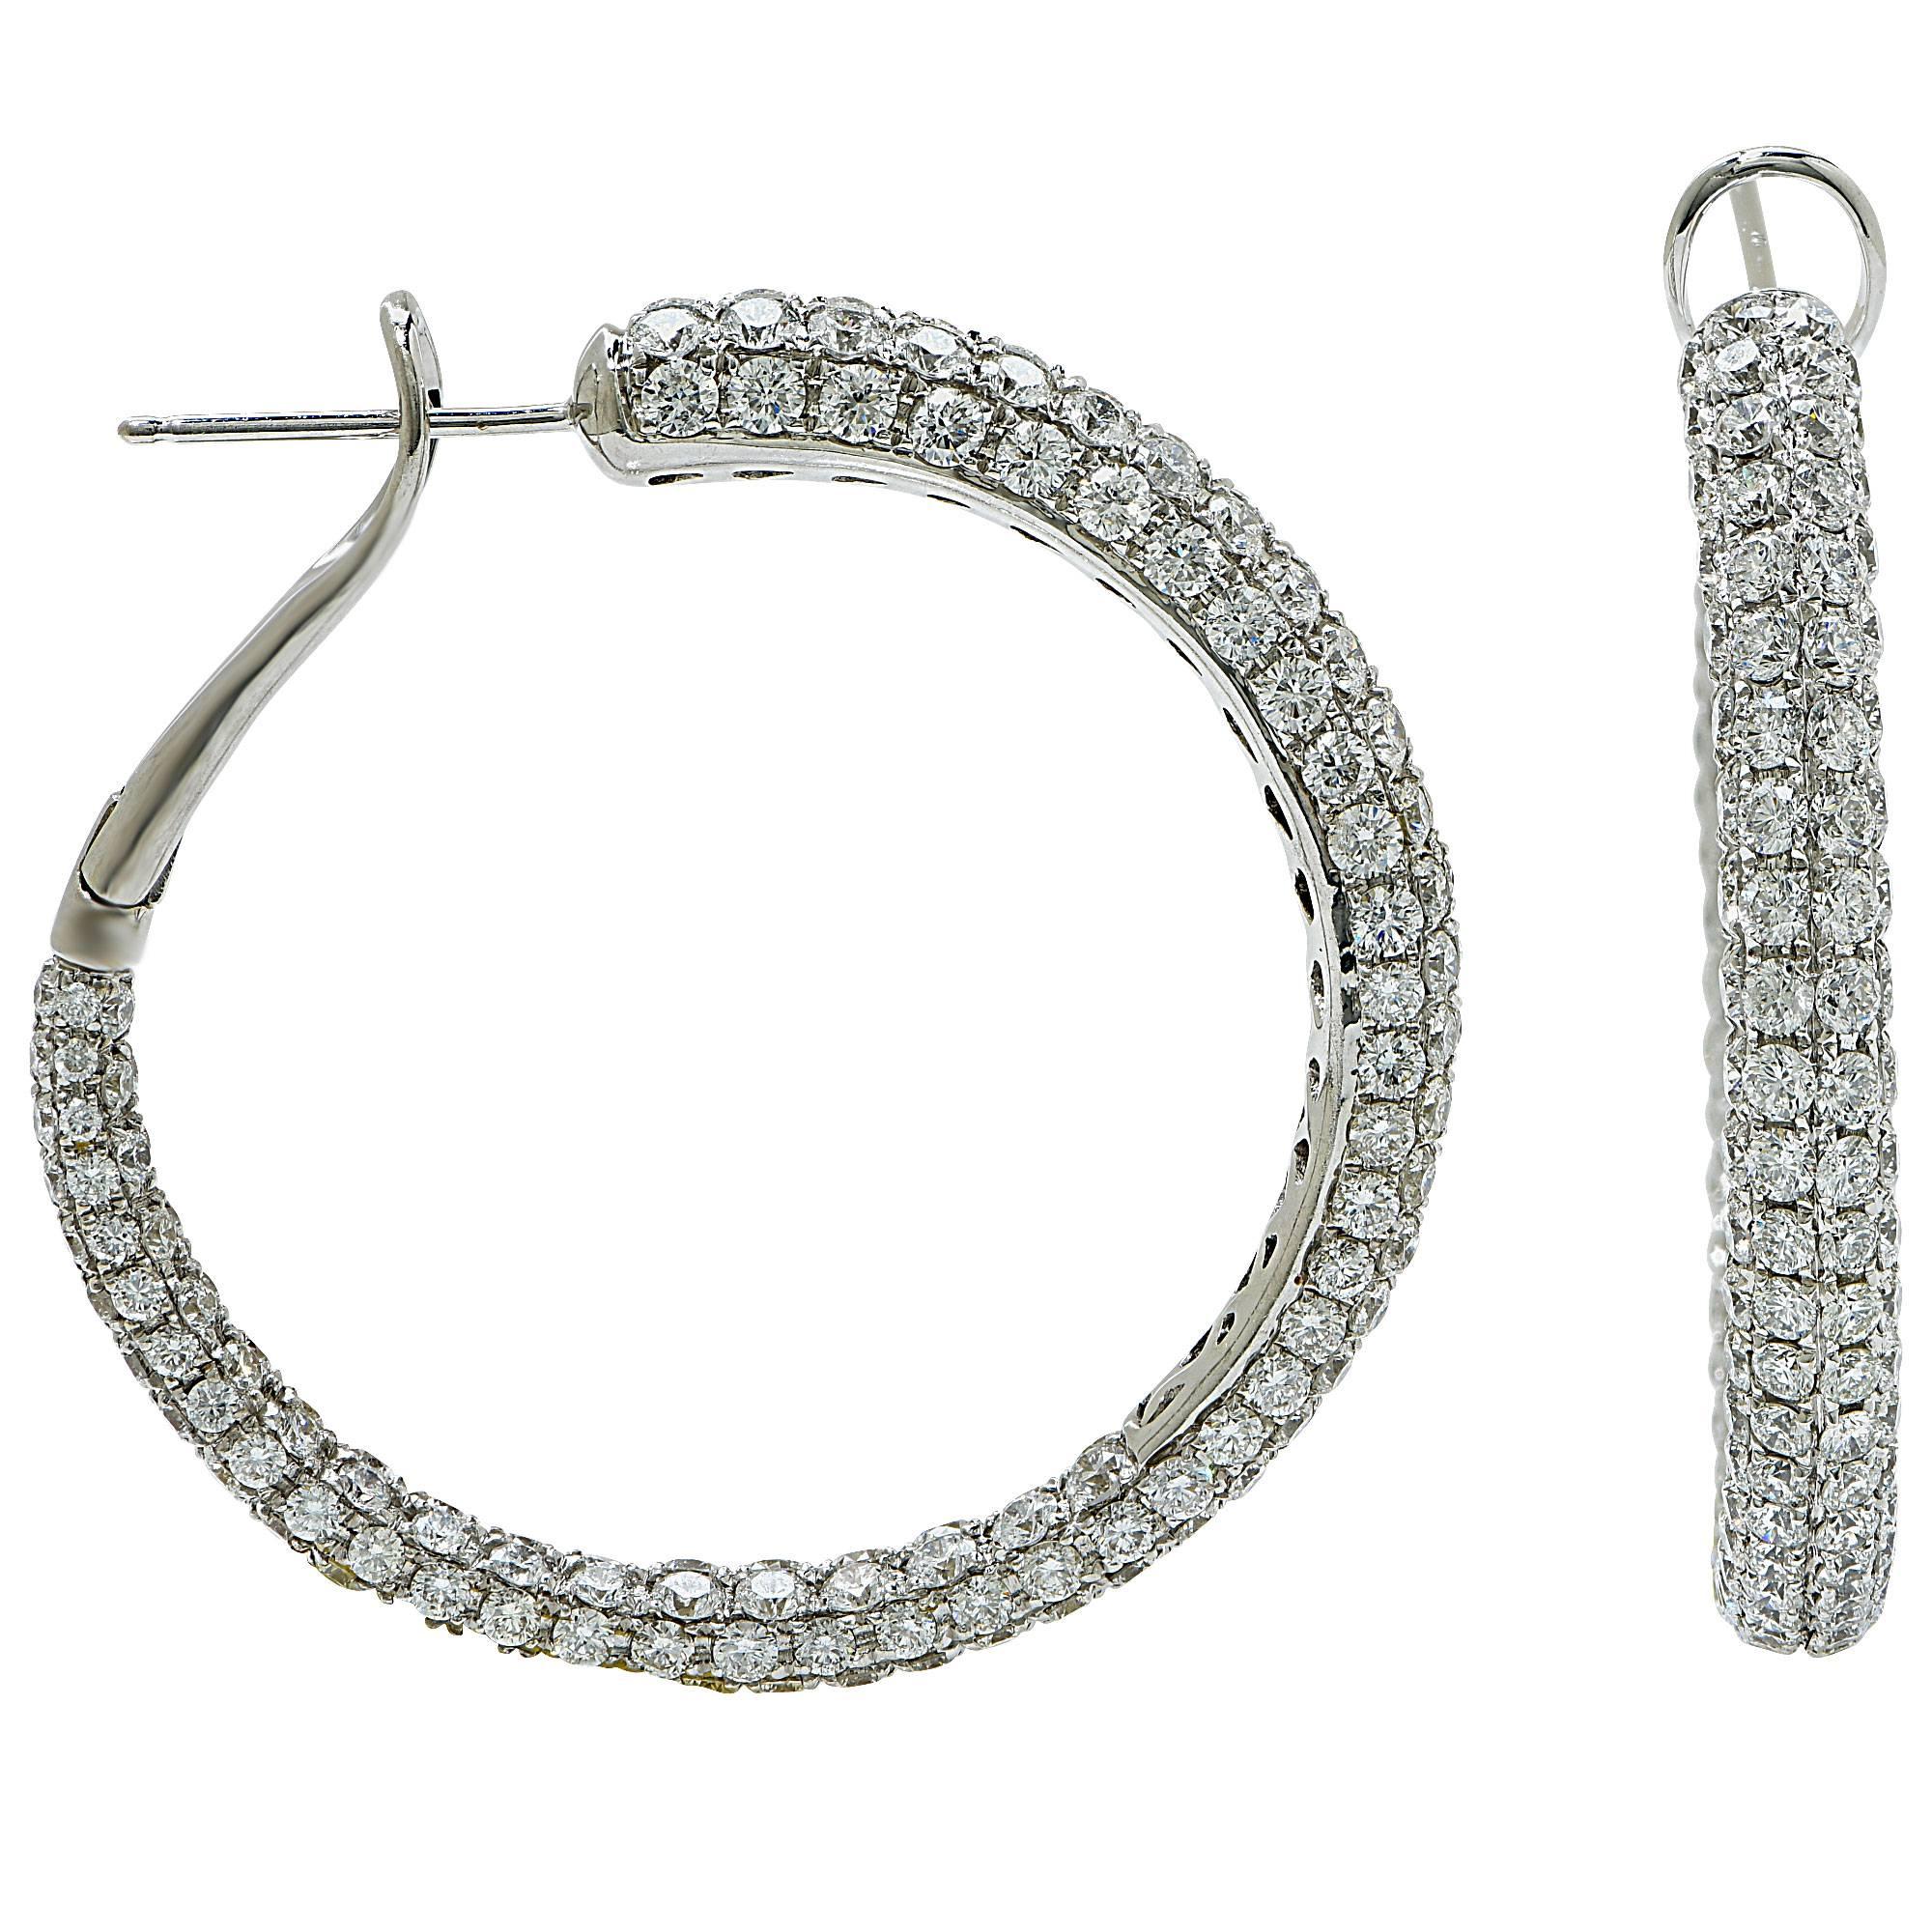 18k white gold hoop earrings featuring approximately 10cts of round brilliant cut diamonds G color VS clarity.

The earrings measure 1.49 inch in height by .17 inch in width by 1.44 inch in depth.
It is stamped and tested as 18k gold.
The metal